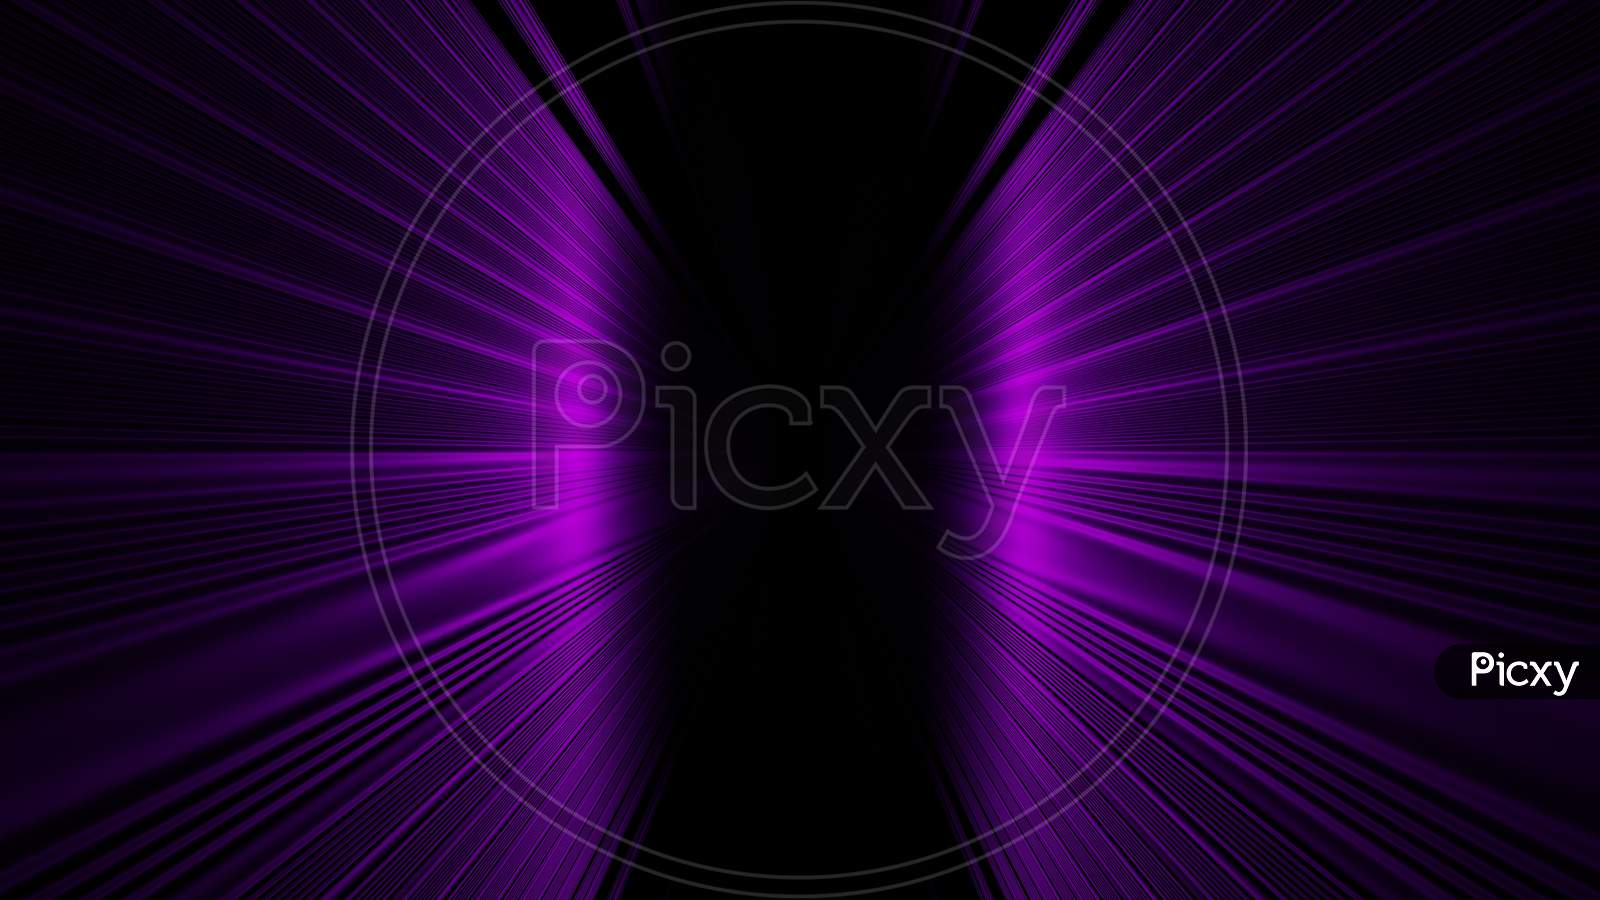 3D Illustration Graphic Of Beautiful Color Shades Of Rainbow Seamless Pattern Starting With Purple Color.